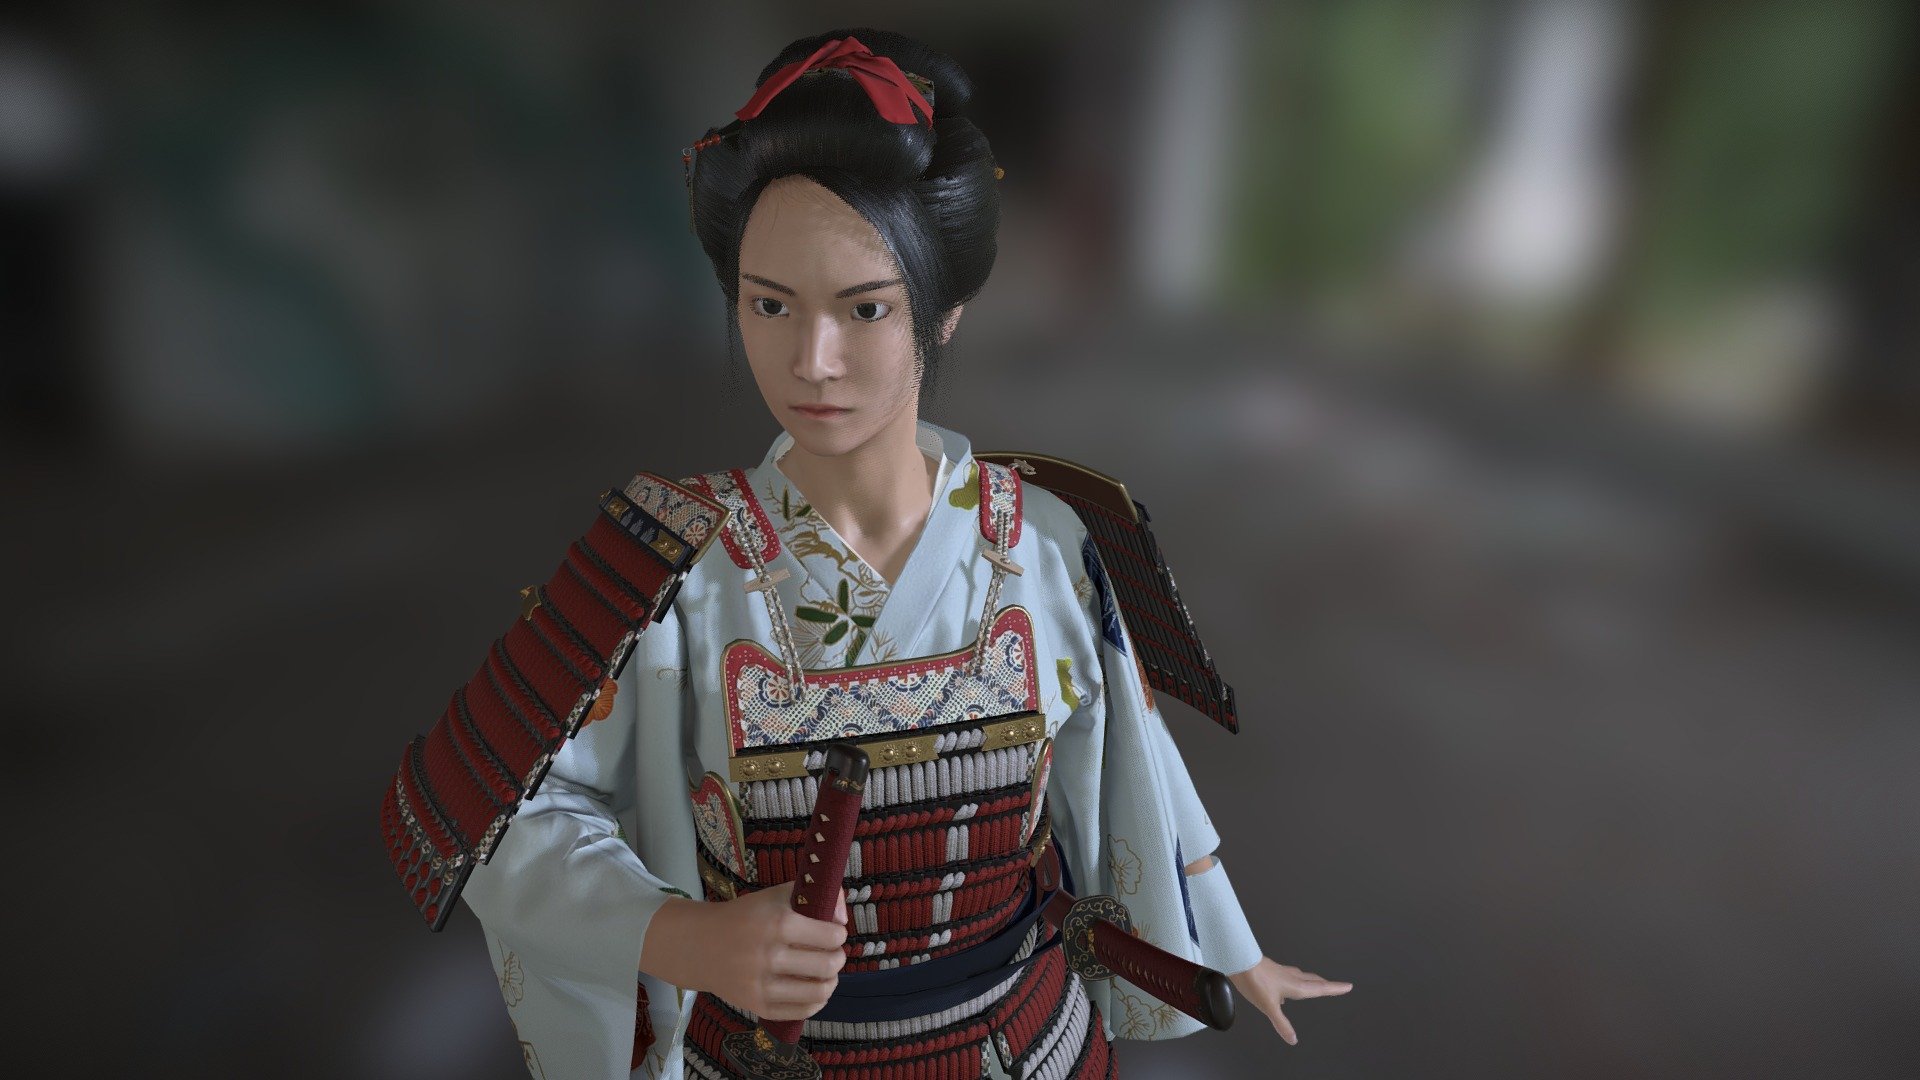 The character I did in Artstation Feudal Japan Game Character challenge, final art showcase. See more at https://www.artstation.com/hanchenyang 3d model